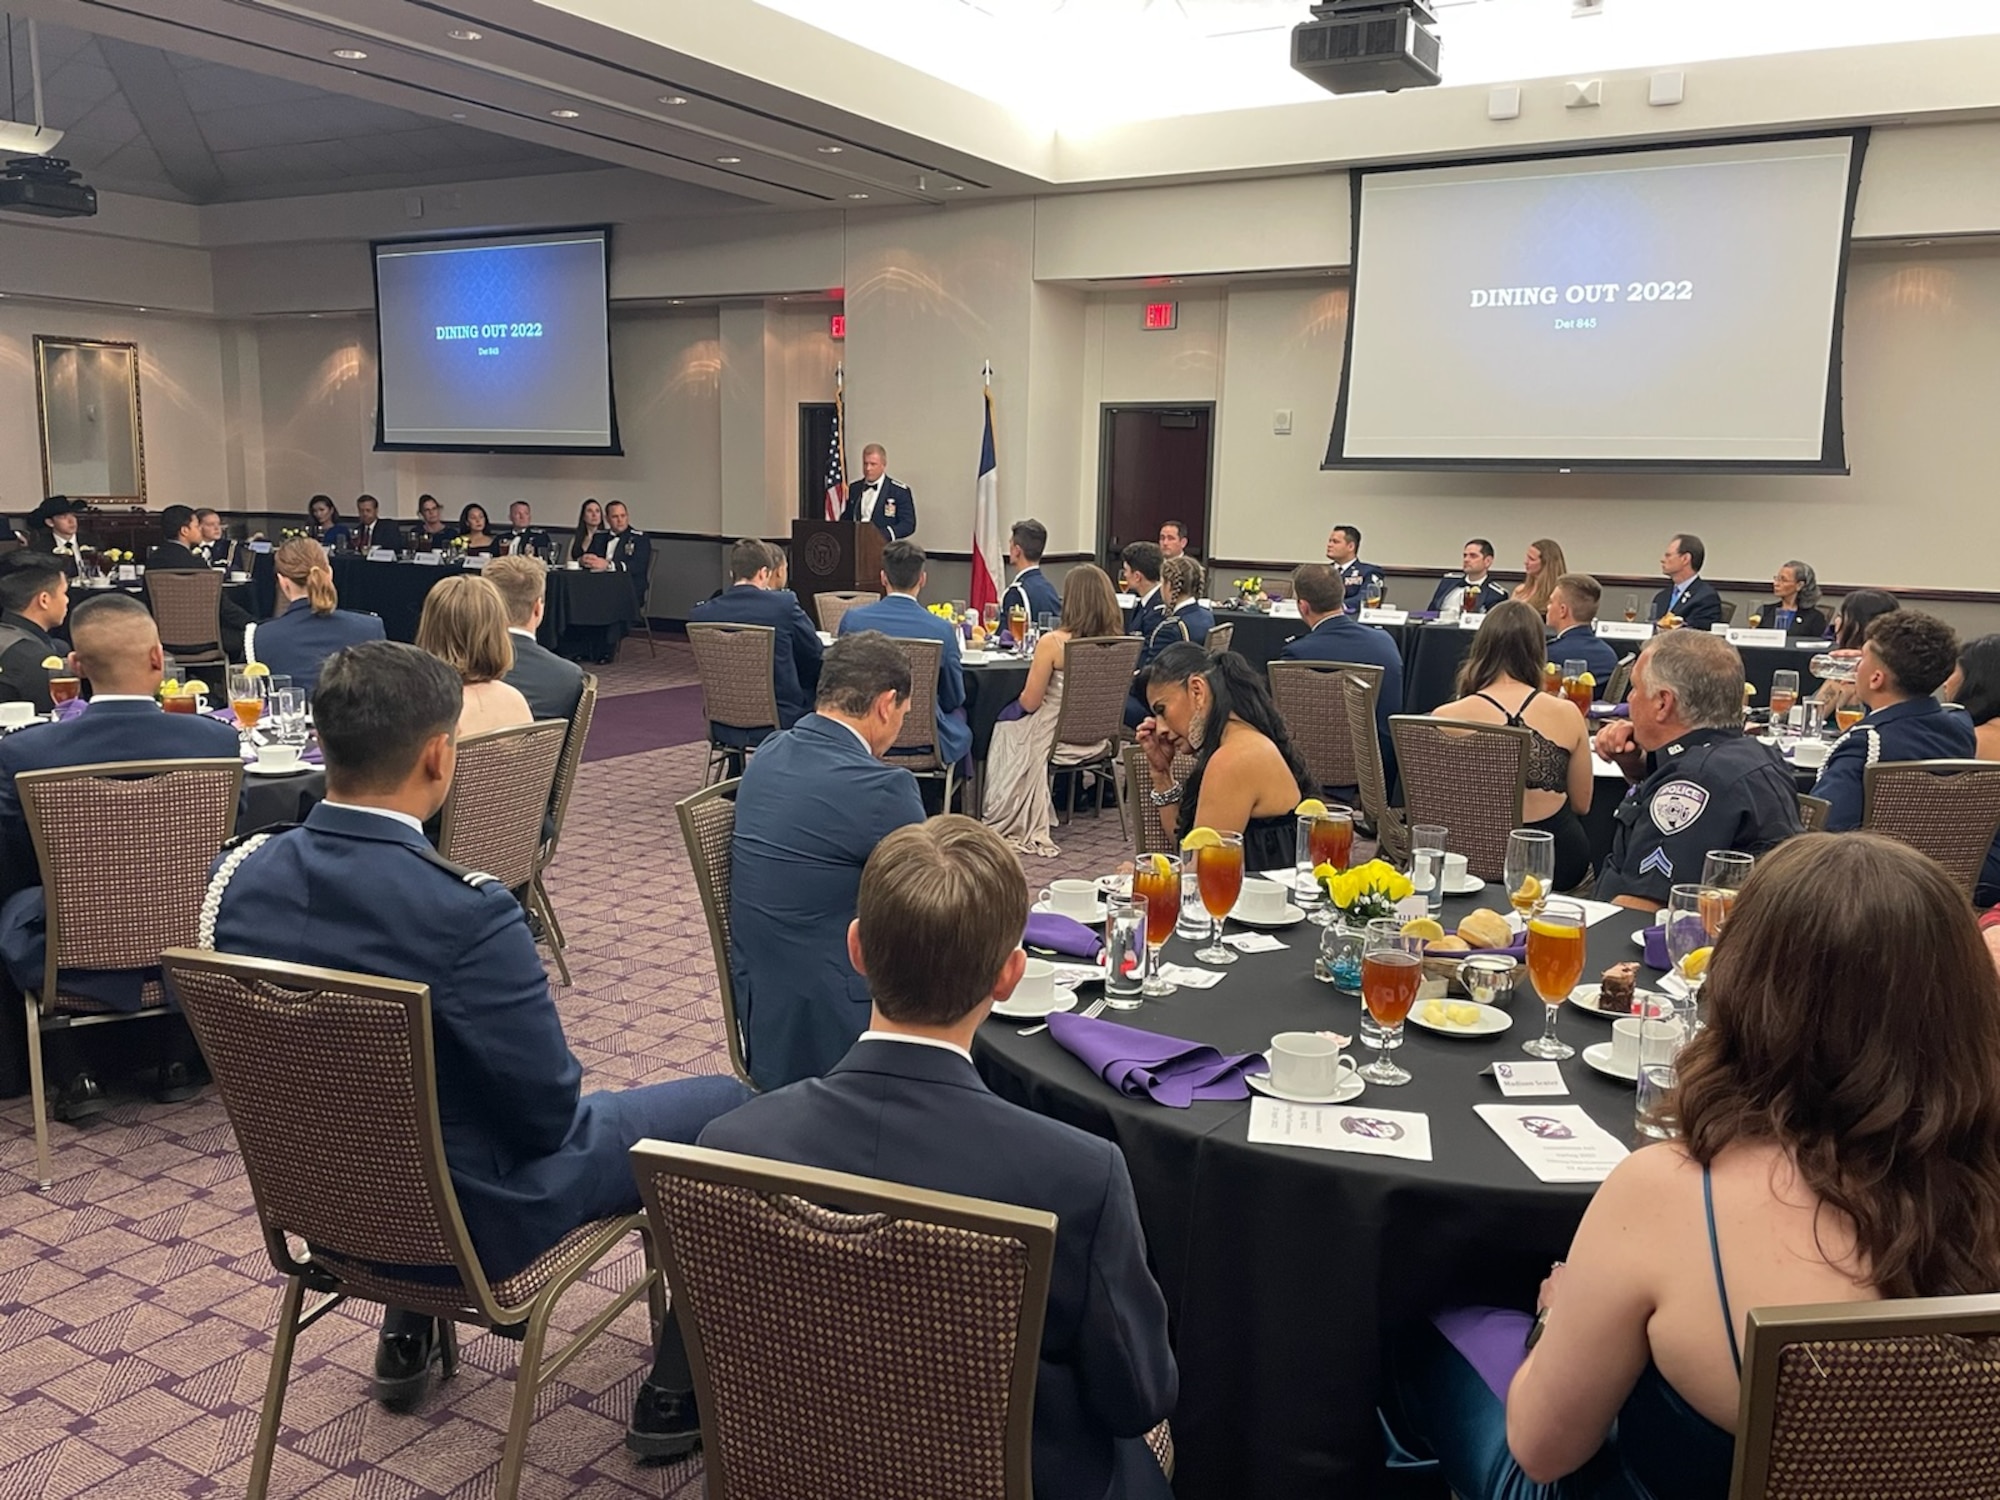 301st Fighter Wing Commander Col. Allen Duckworth speaks to the cadets at Texas Christian University Air Force Reserve Officer Training Corps Detachment 845’s Spring Dining Out Ceremony, April 23. Many of these cadets were attending their first in-person Dining Out due to the pandemic while other cadets were attending their last as they are one week away from graduation and beginning their potential commissioned assignments. (U.S. Air Force photo by Master Sgt. Jeremy Roman)